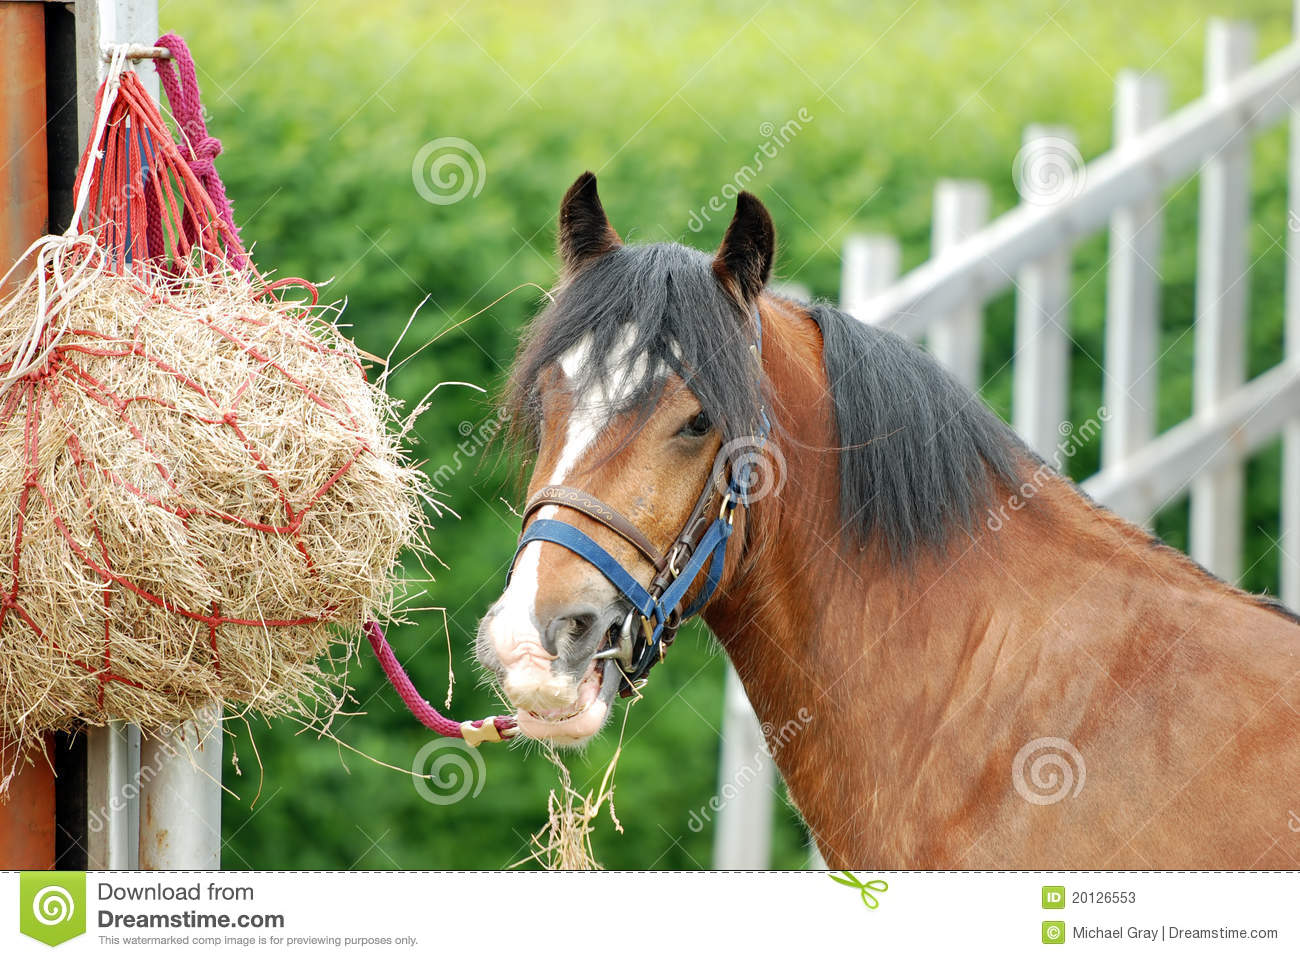 Horse Eating Hay Stock Photos   Image  20126553